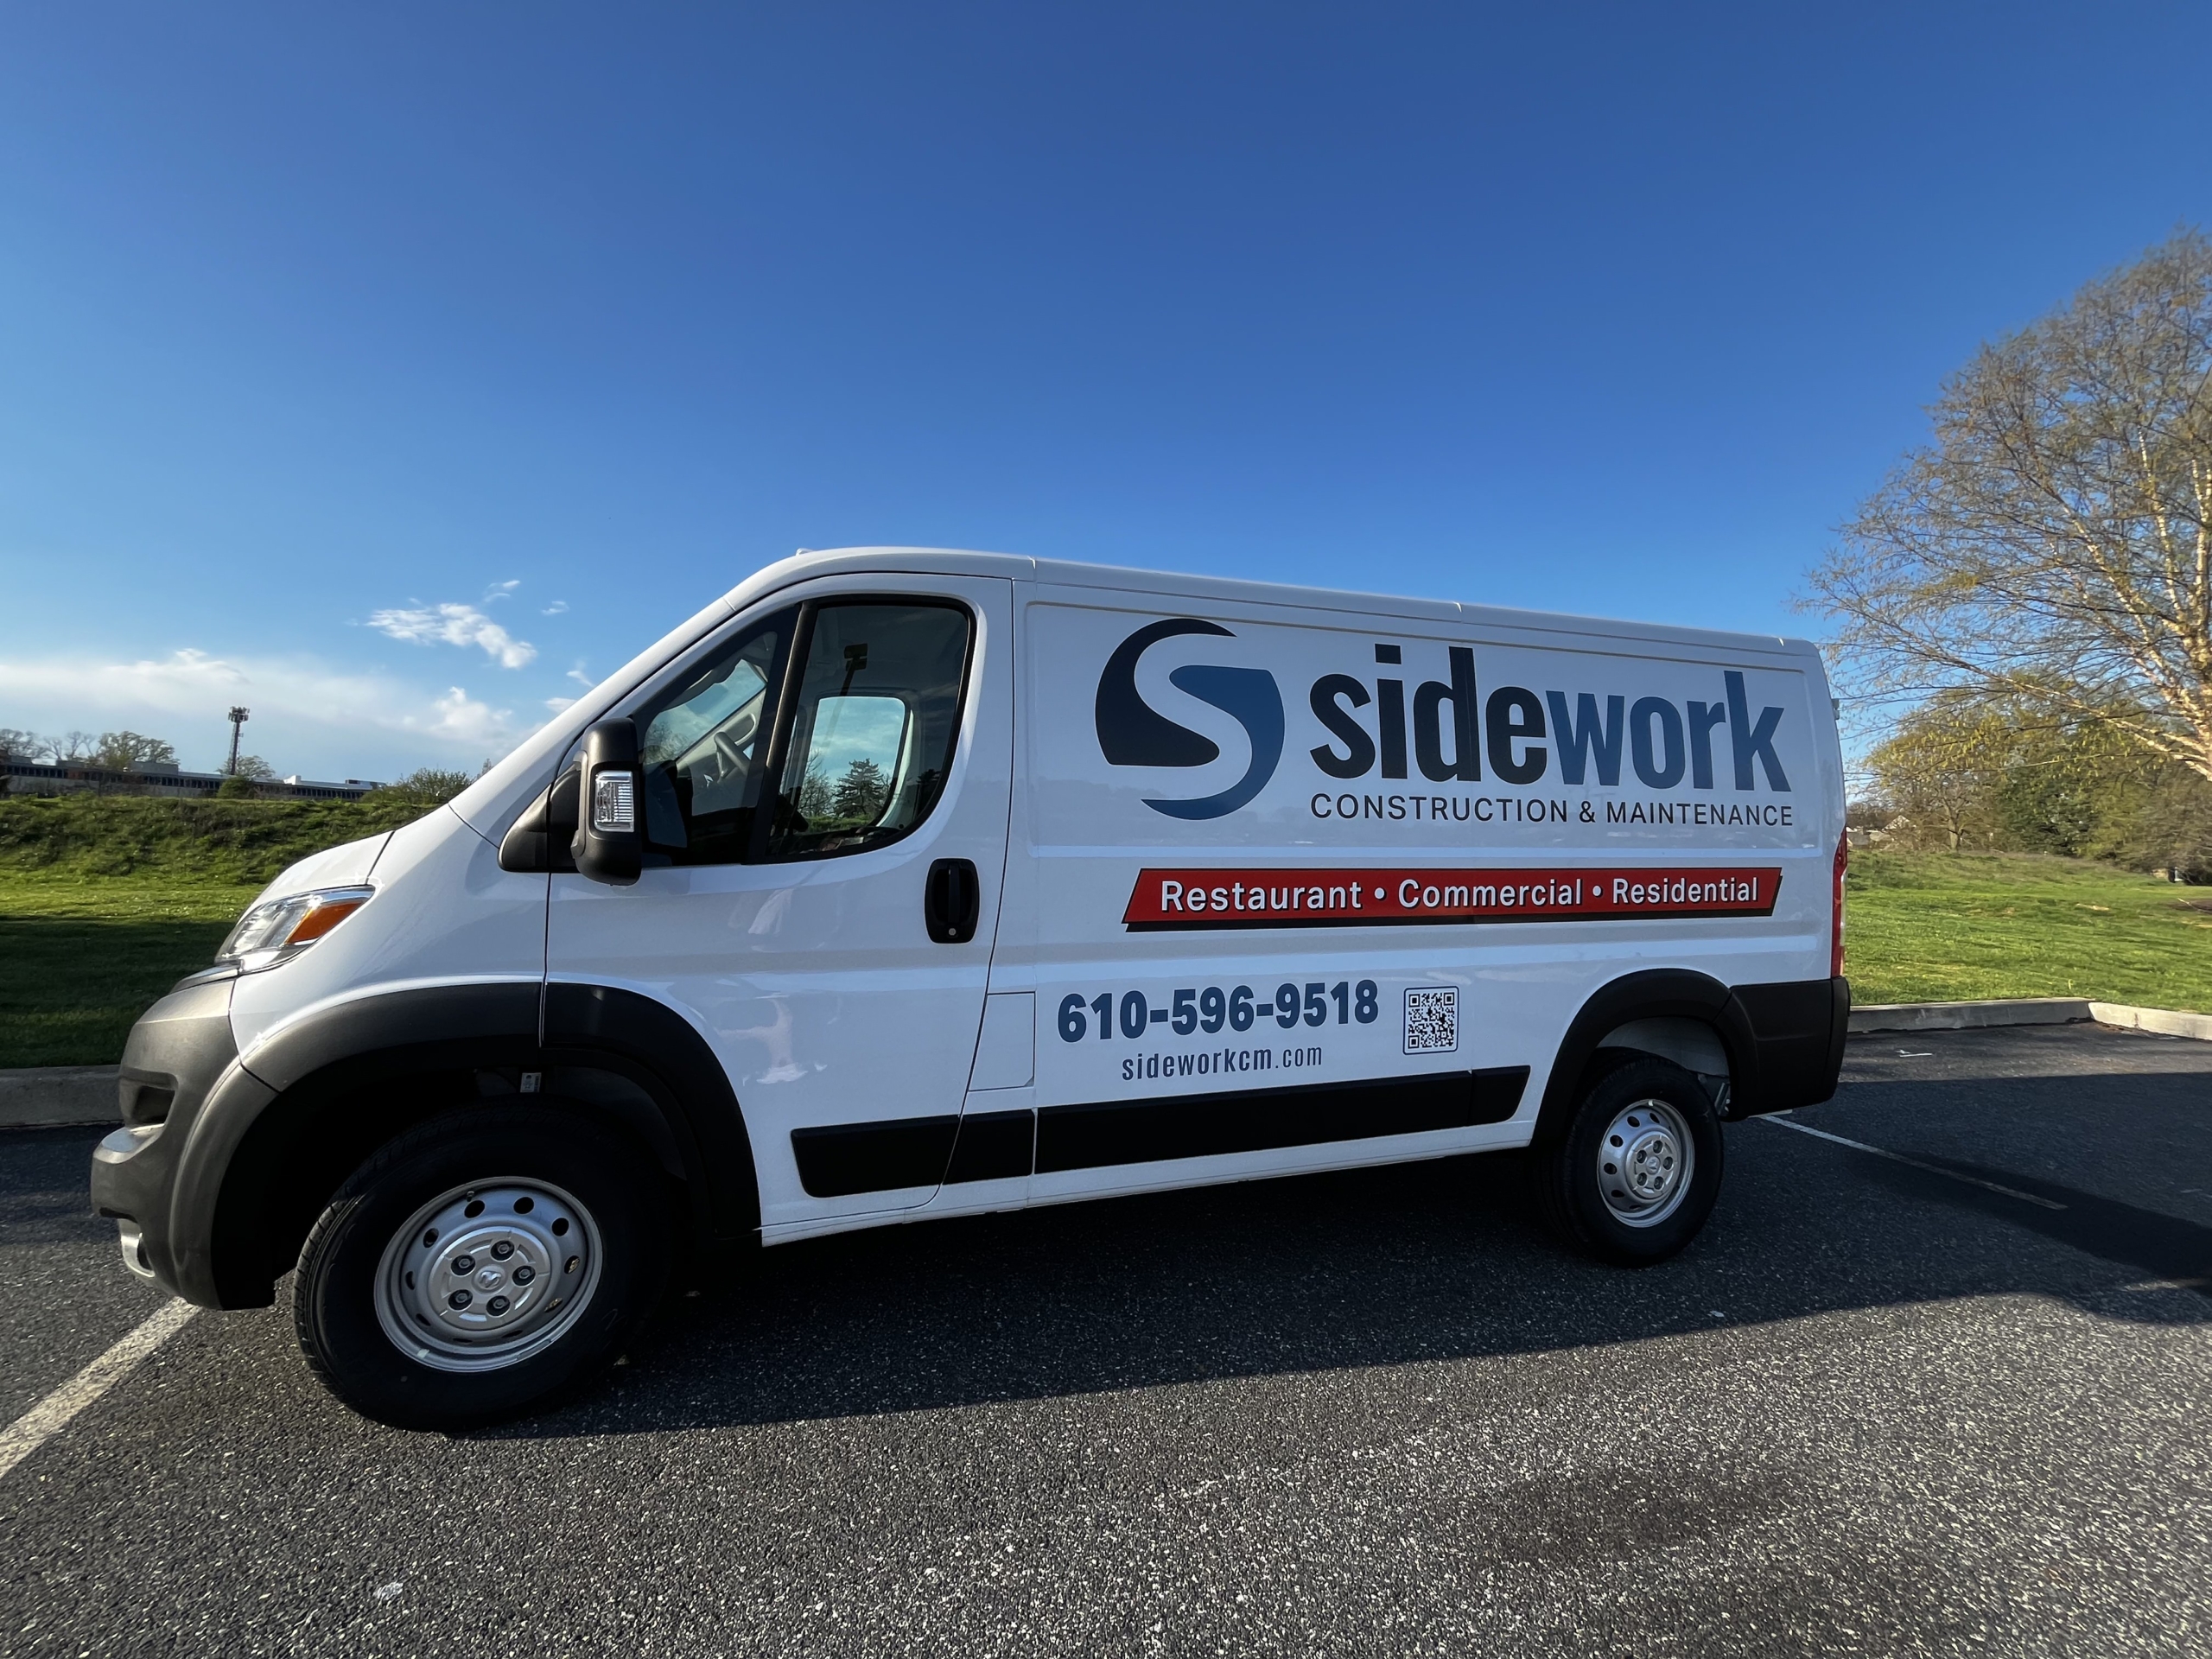 Sidework Mobile Construction and Maintenance Services - Restaurant, Commercial and Residential